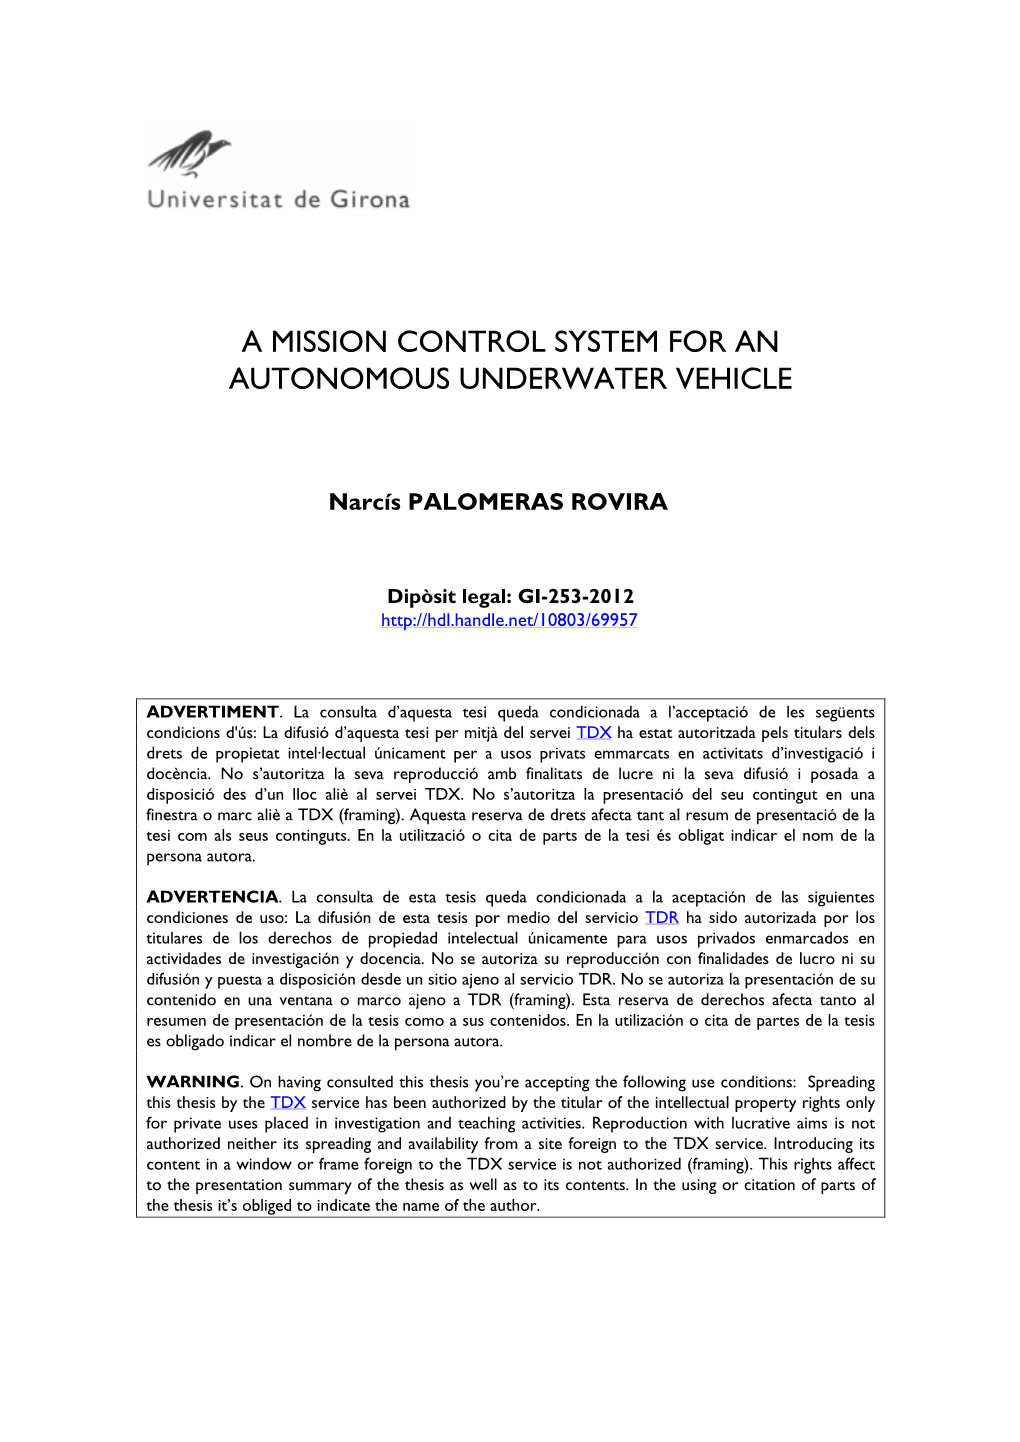 A Mission Control System for and Autonomous Underwater Vehicle